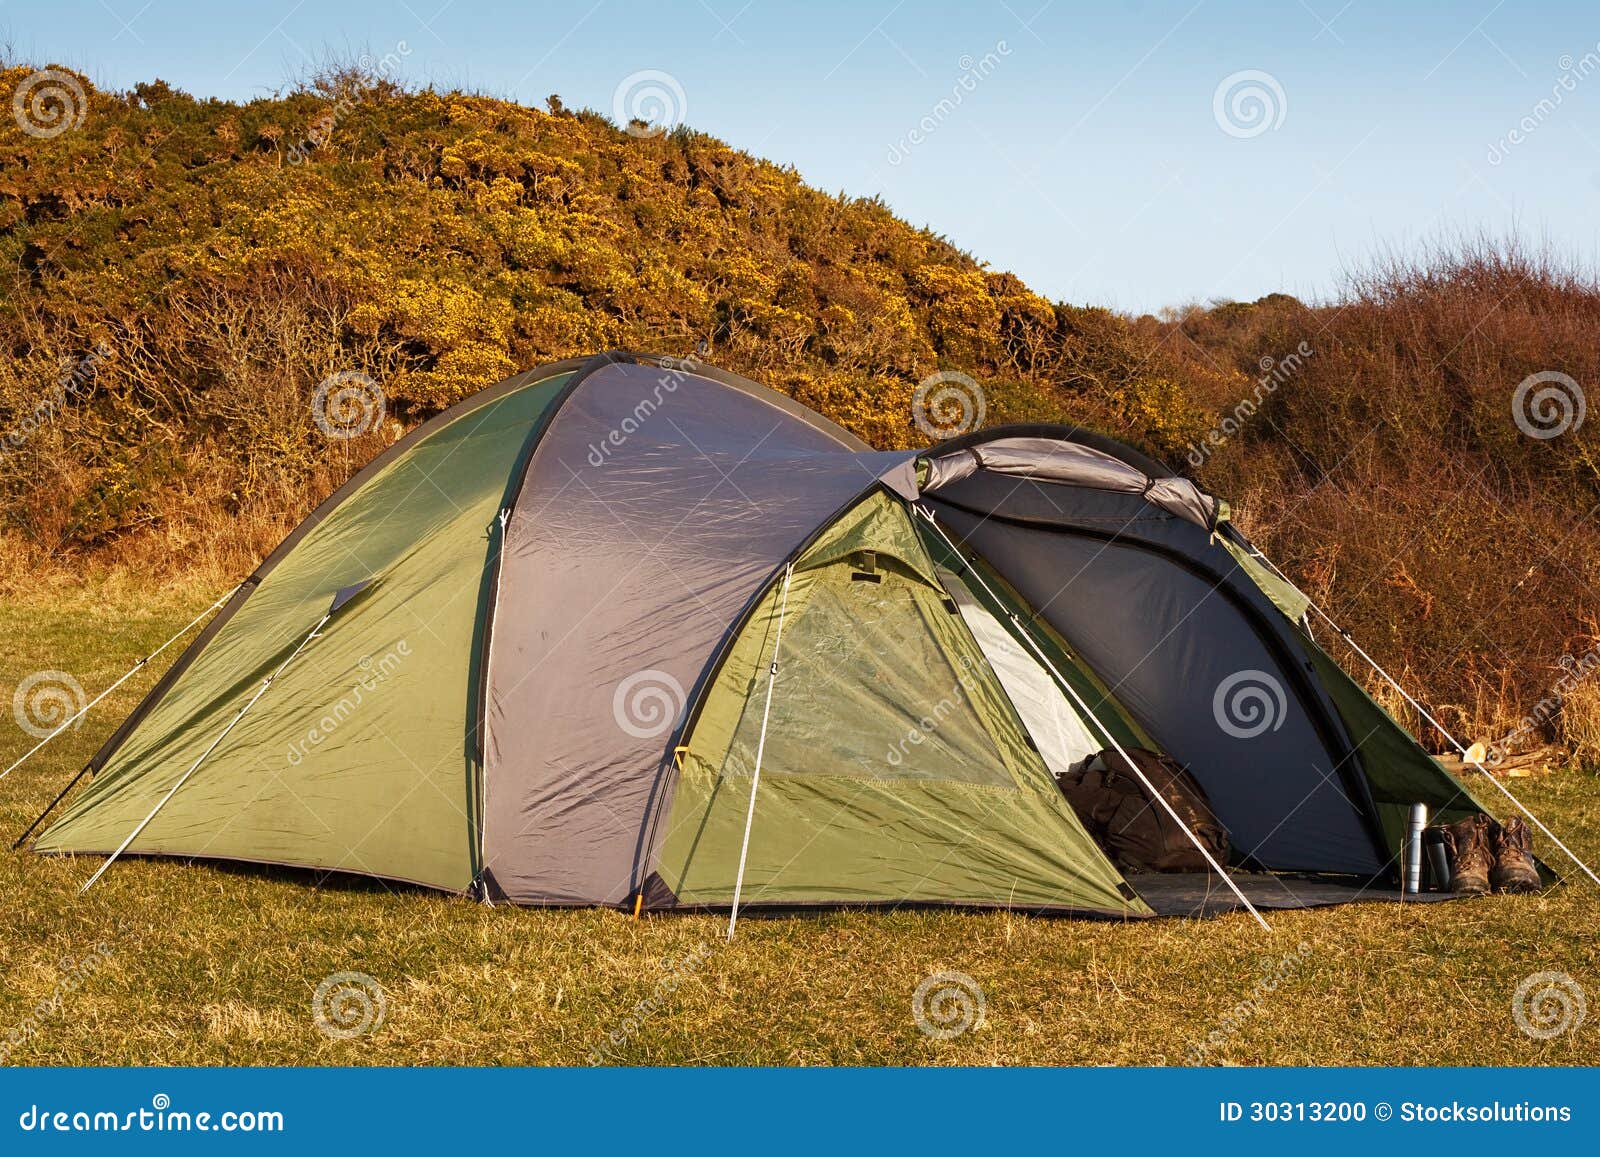 dome tent pitched in field